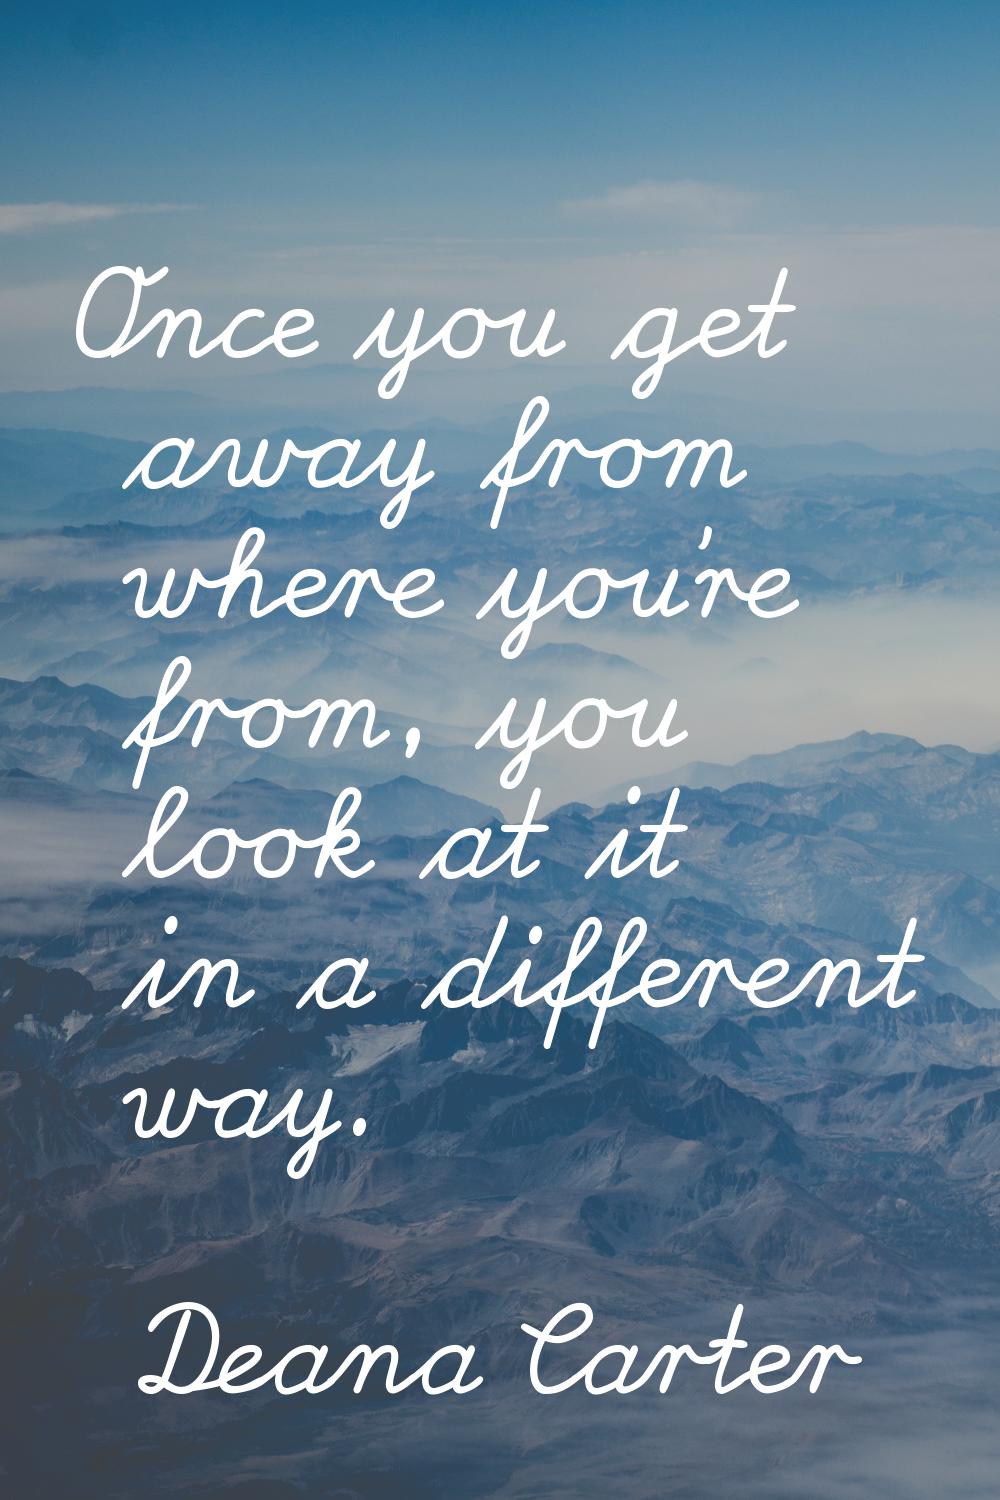 Once you get away from where you're from, you look at it in a different way.